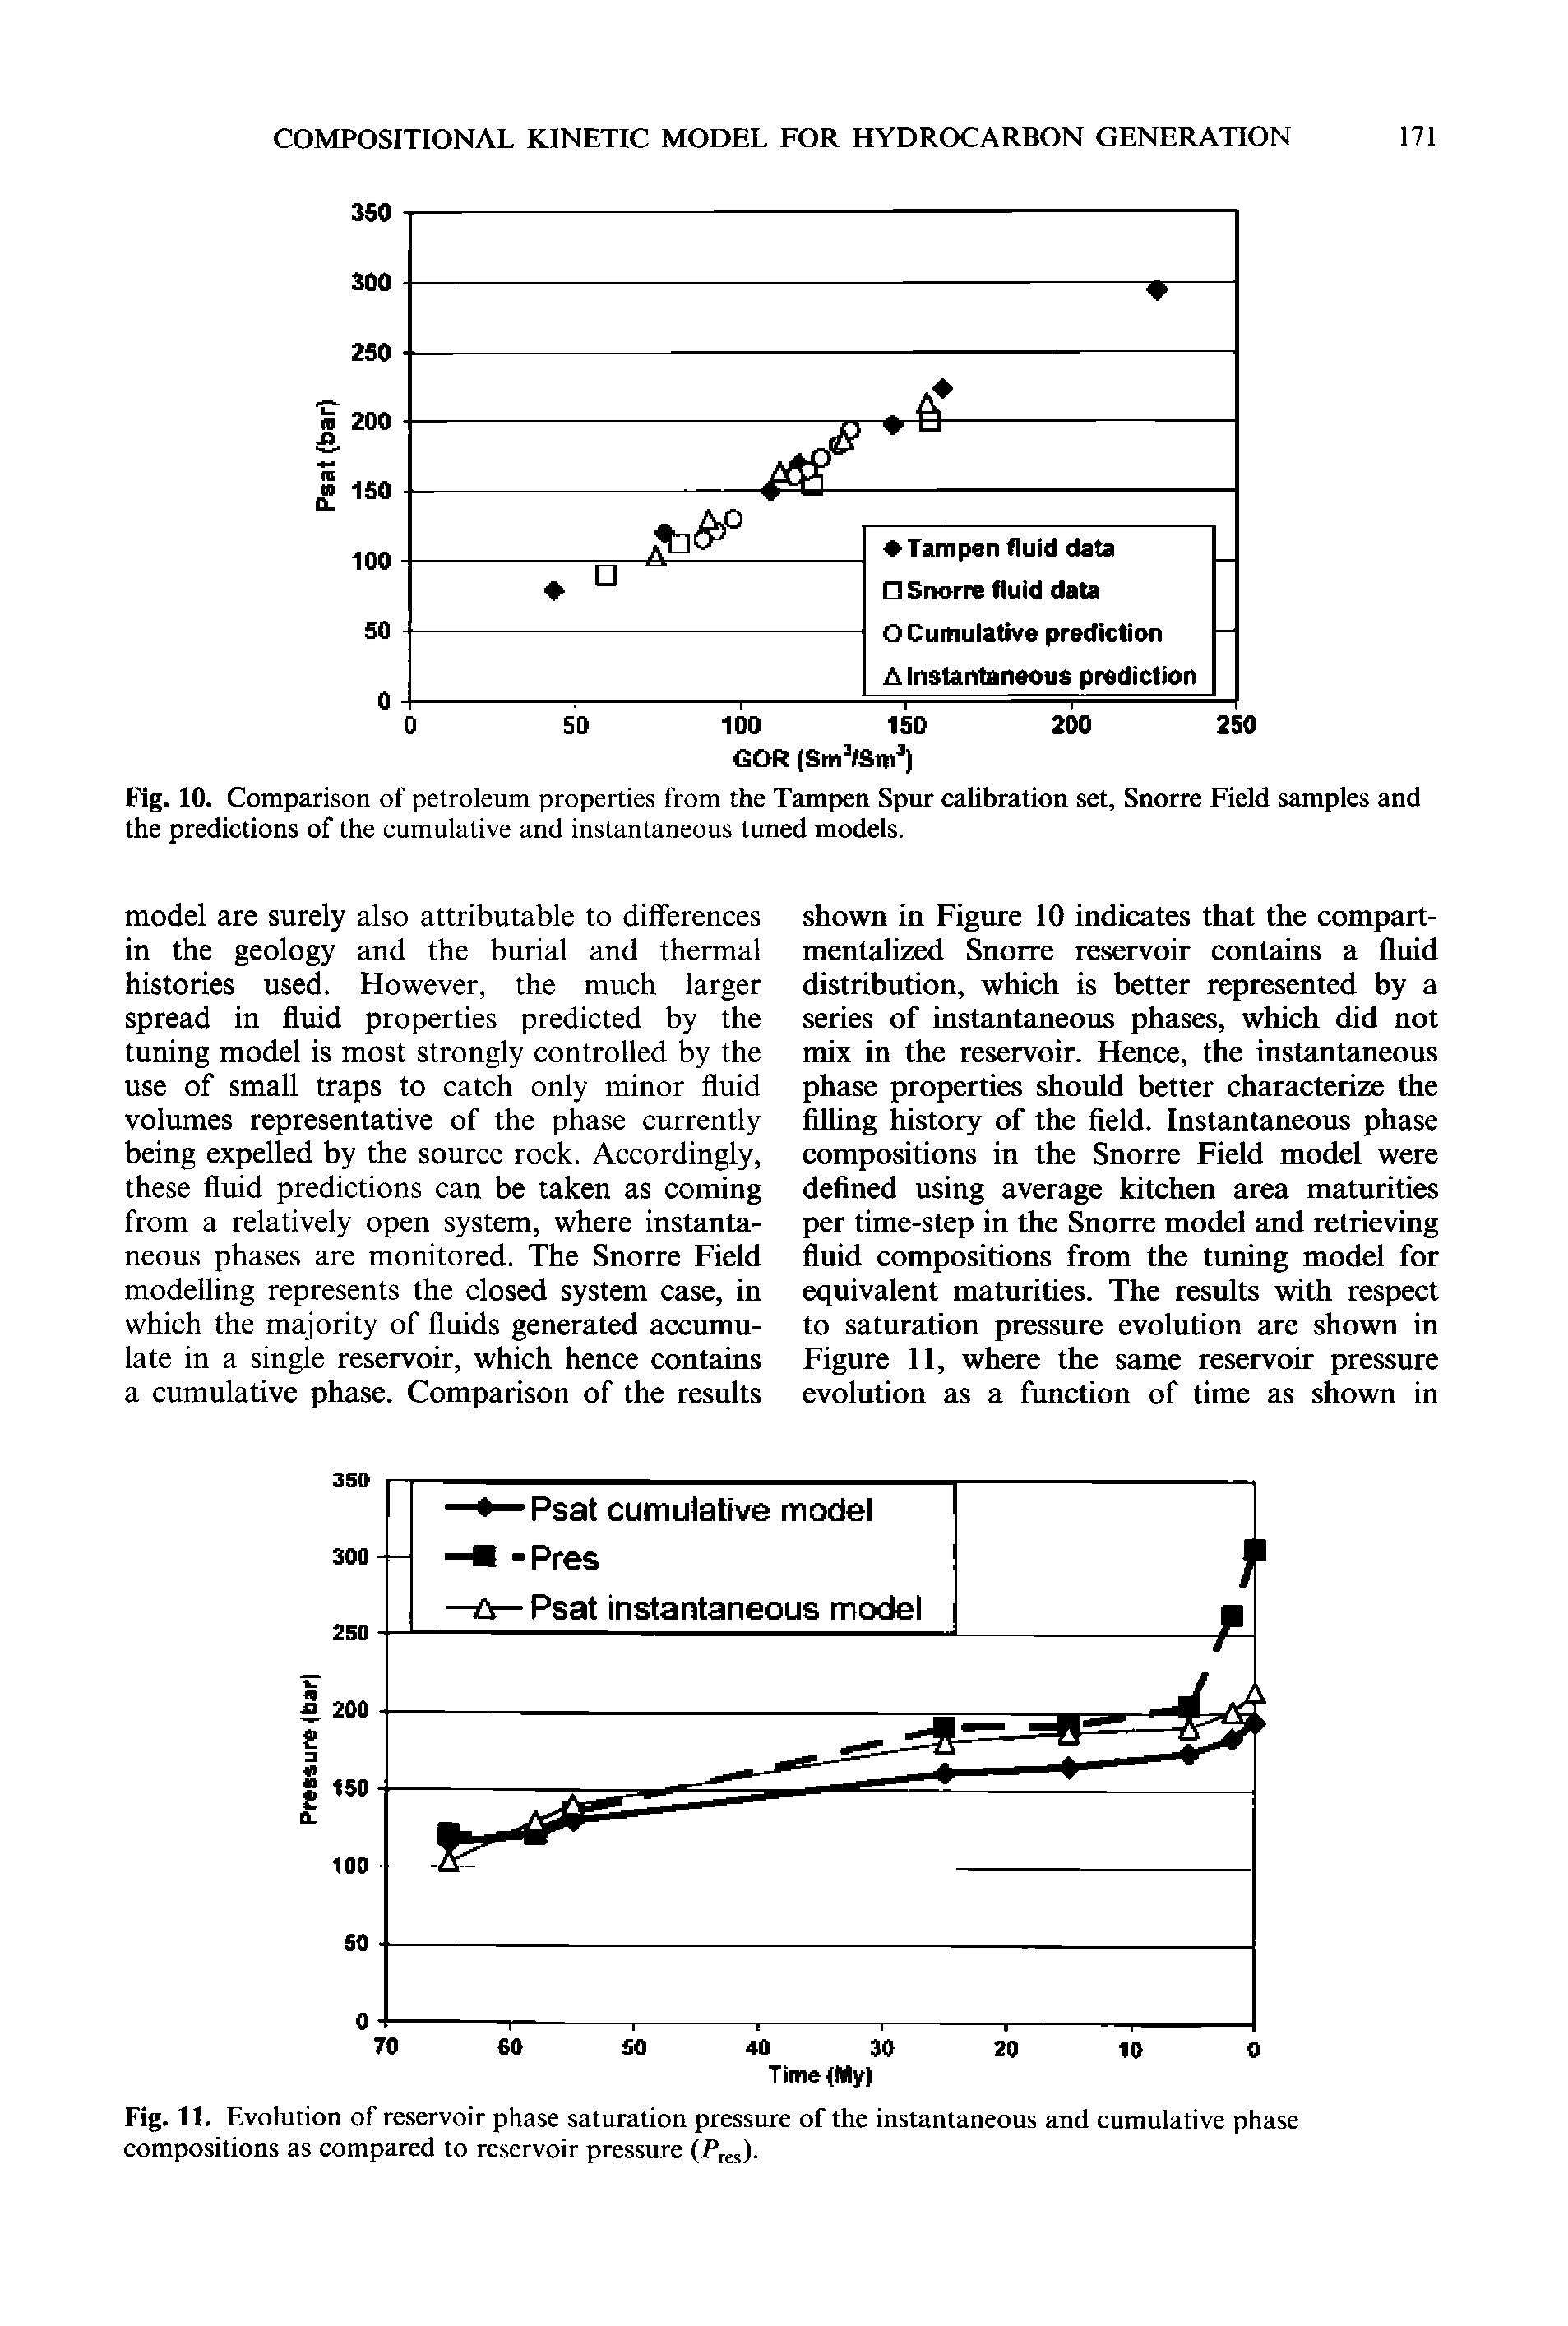 Fig. 10. Comparison of petroleum properties from the Tampen Spur calibration set, Snorre Field samples and the predictions of the cumulative and instantaneous tuned models.